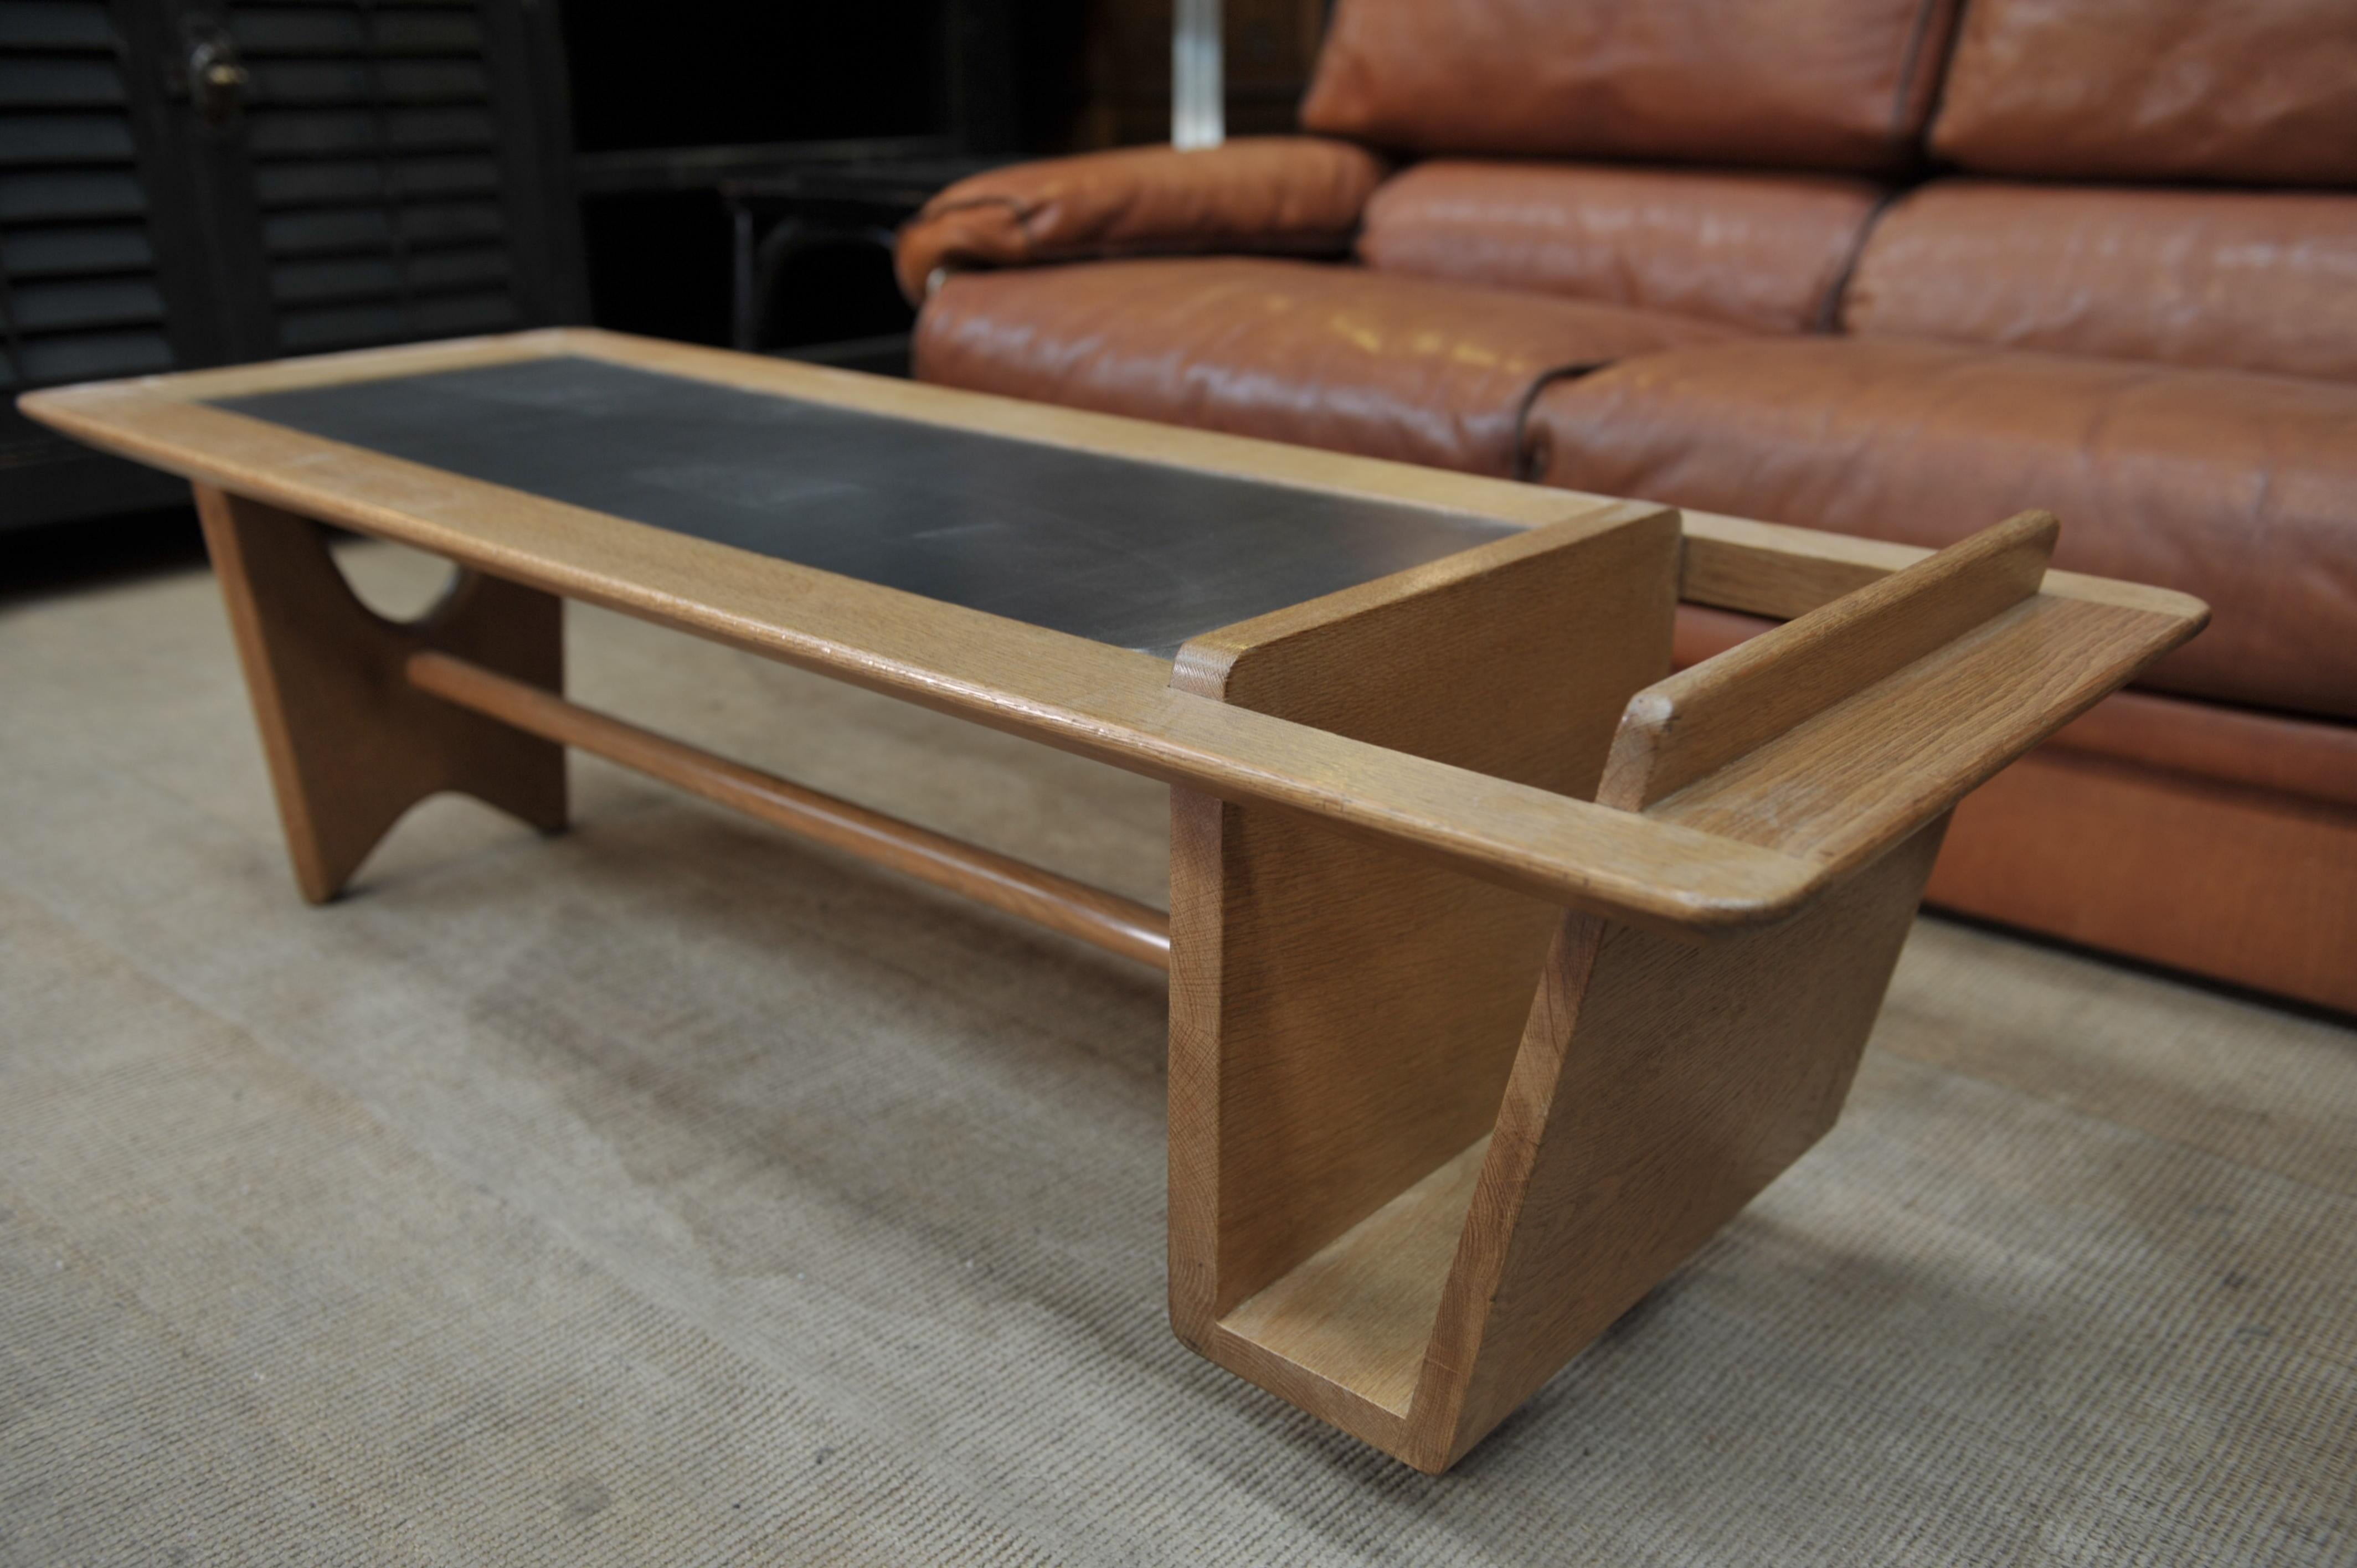 Midcentury solid oak coffee table by French designers Guillerme & Chambron for Votre Maison, circa 1950. Recent metal top. All in excellent condition.